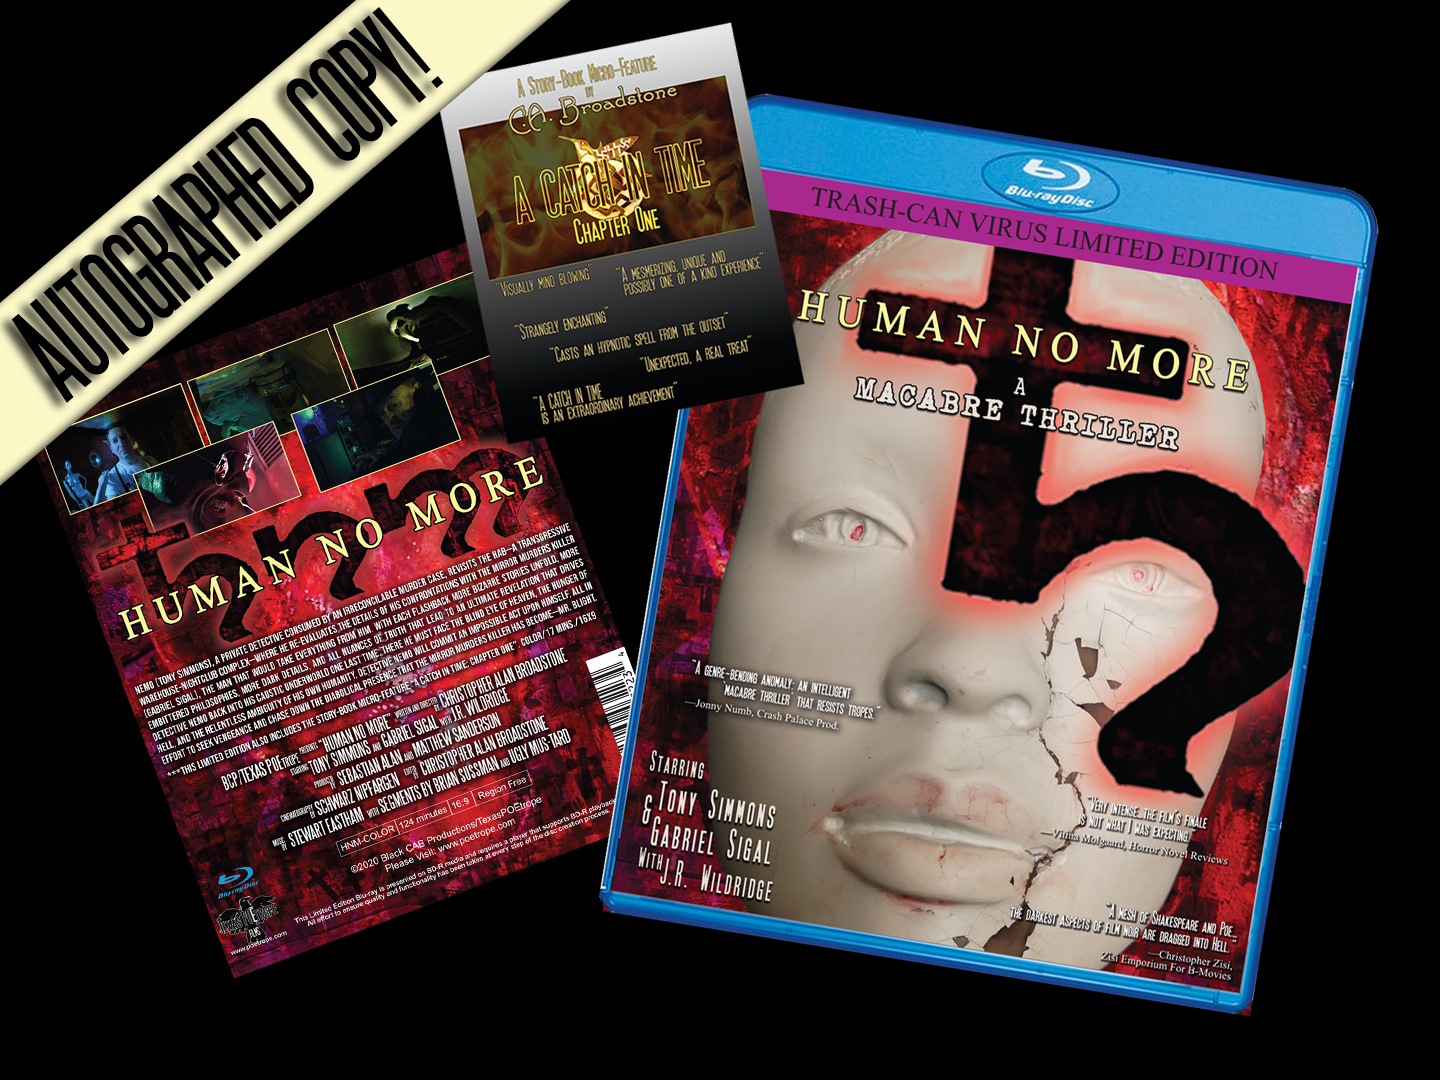 Primary image for HUMAN NO MORE: Trash-Can Virus Limited Edition––Blu-ray (SIGNED)